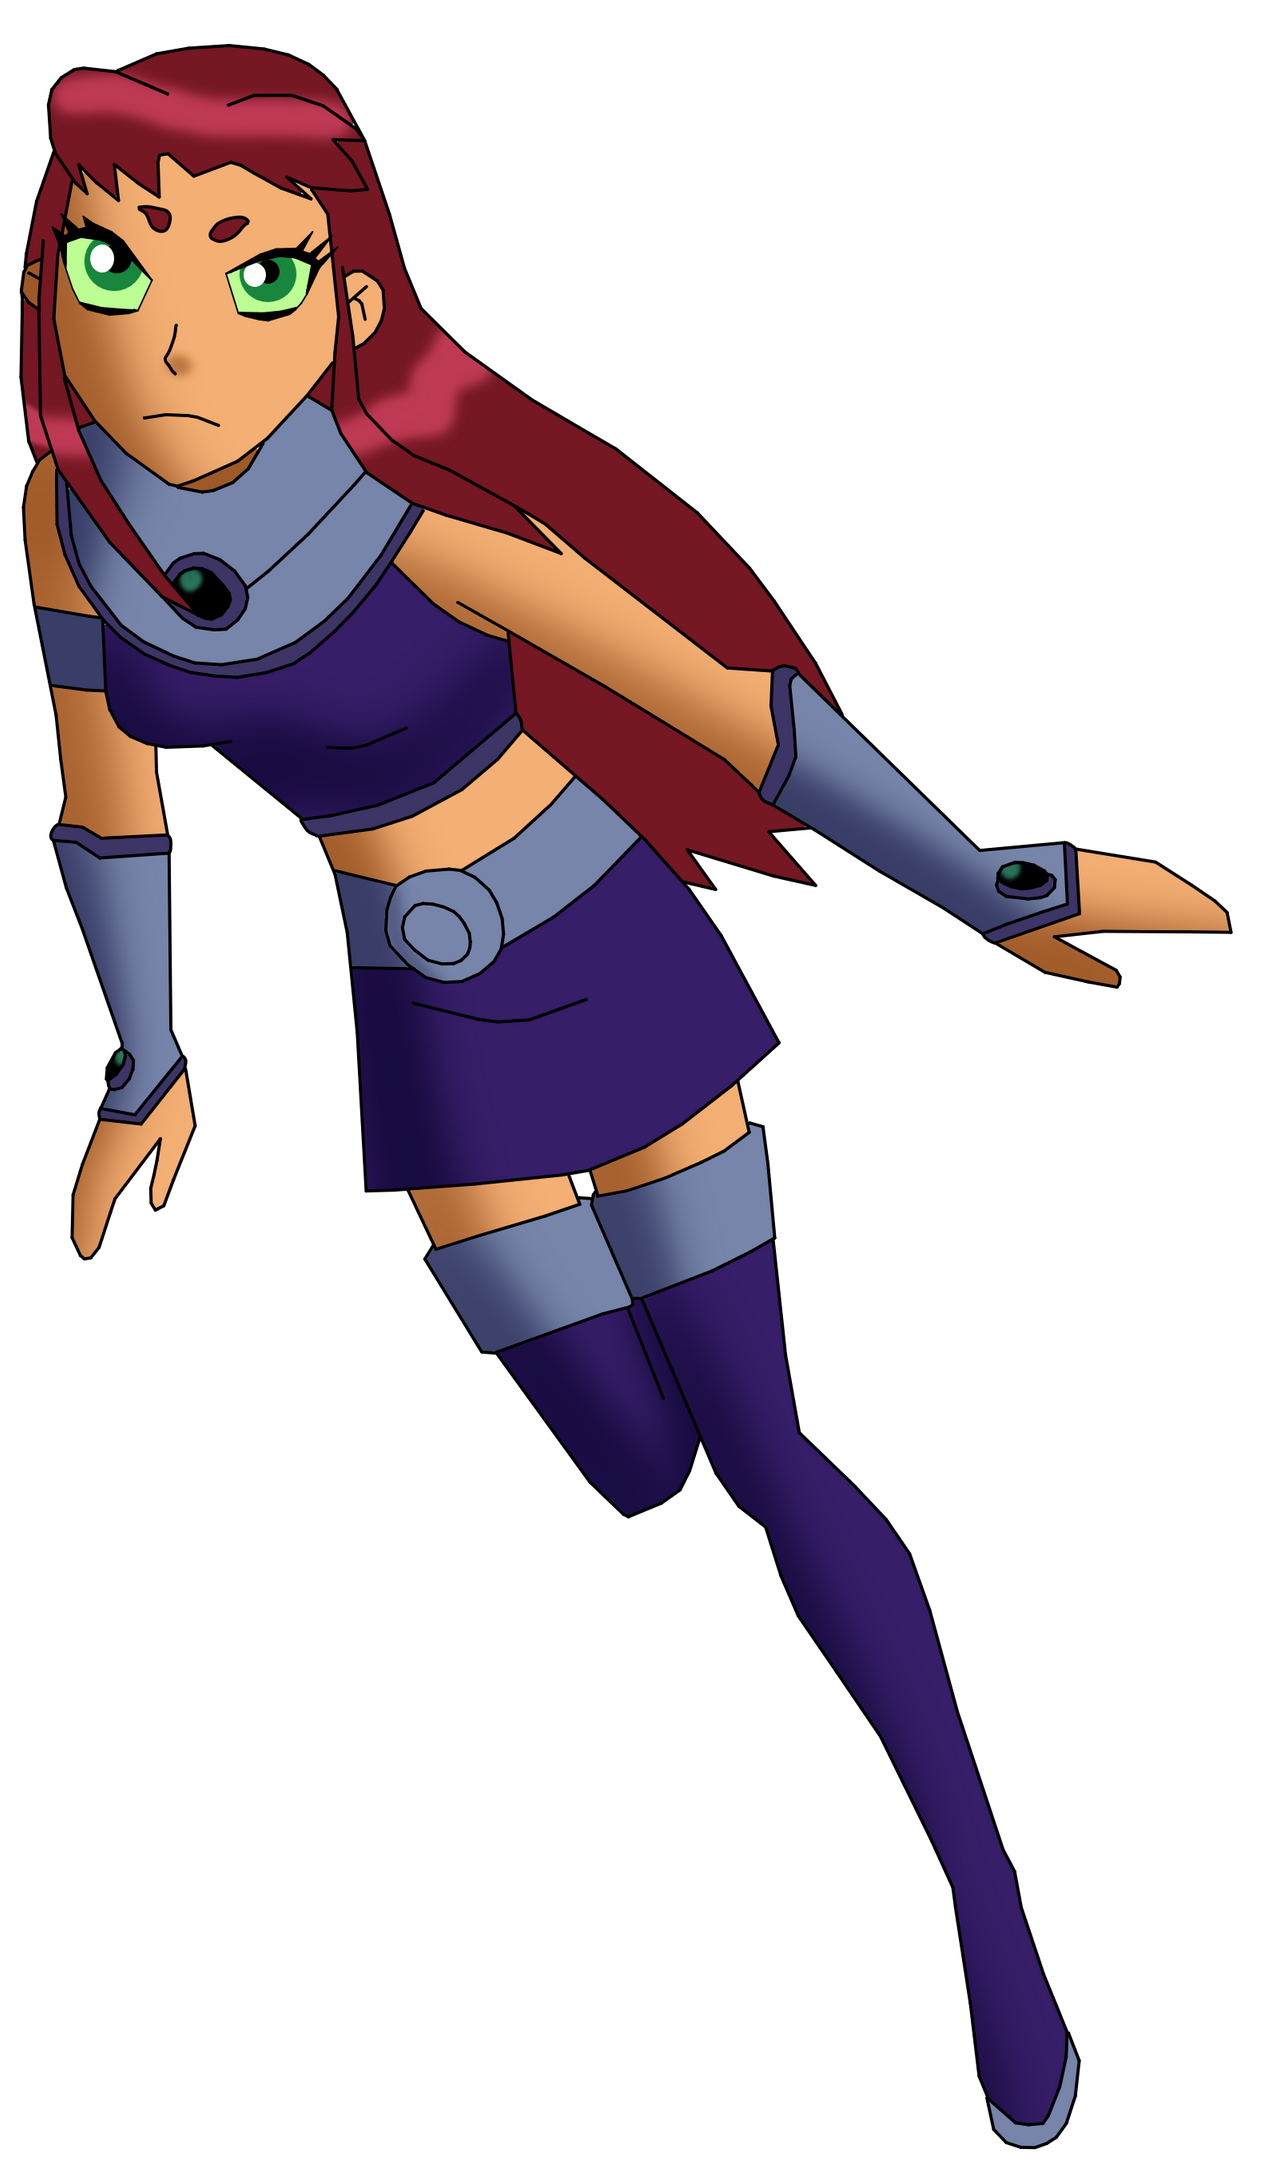 Starfire Flying Suspiciously By Captainedwardteague On Deviantart